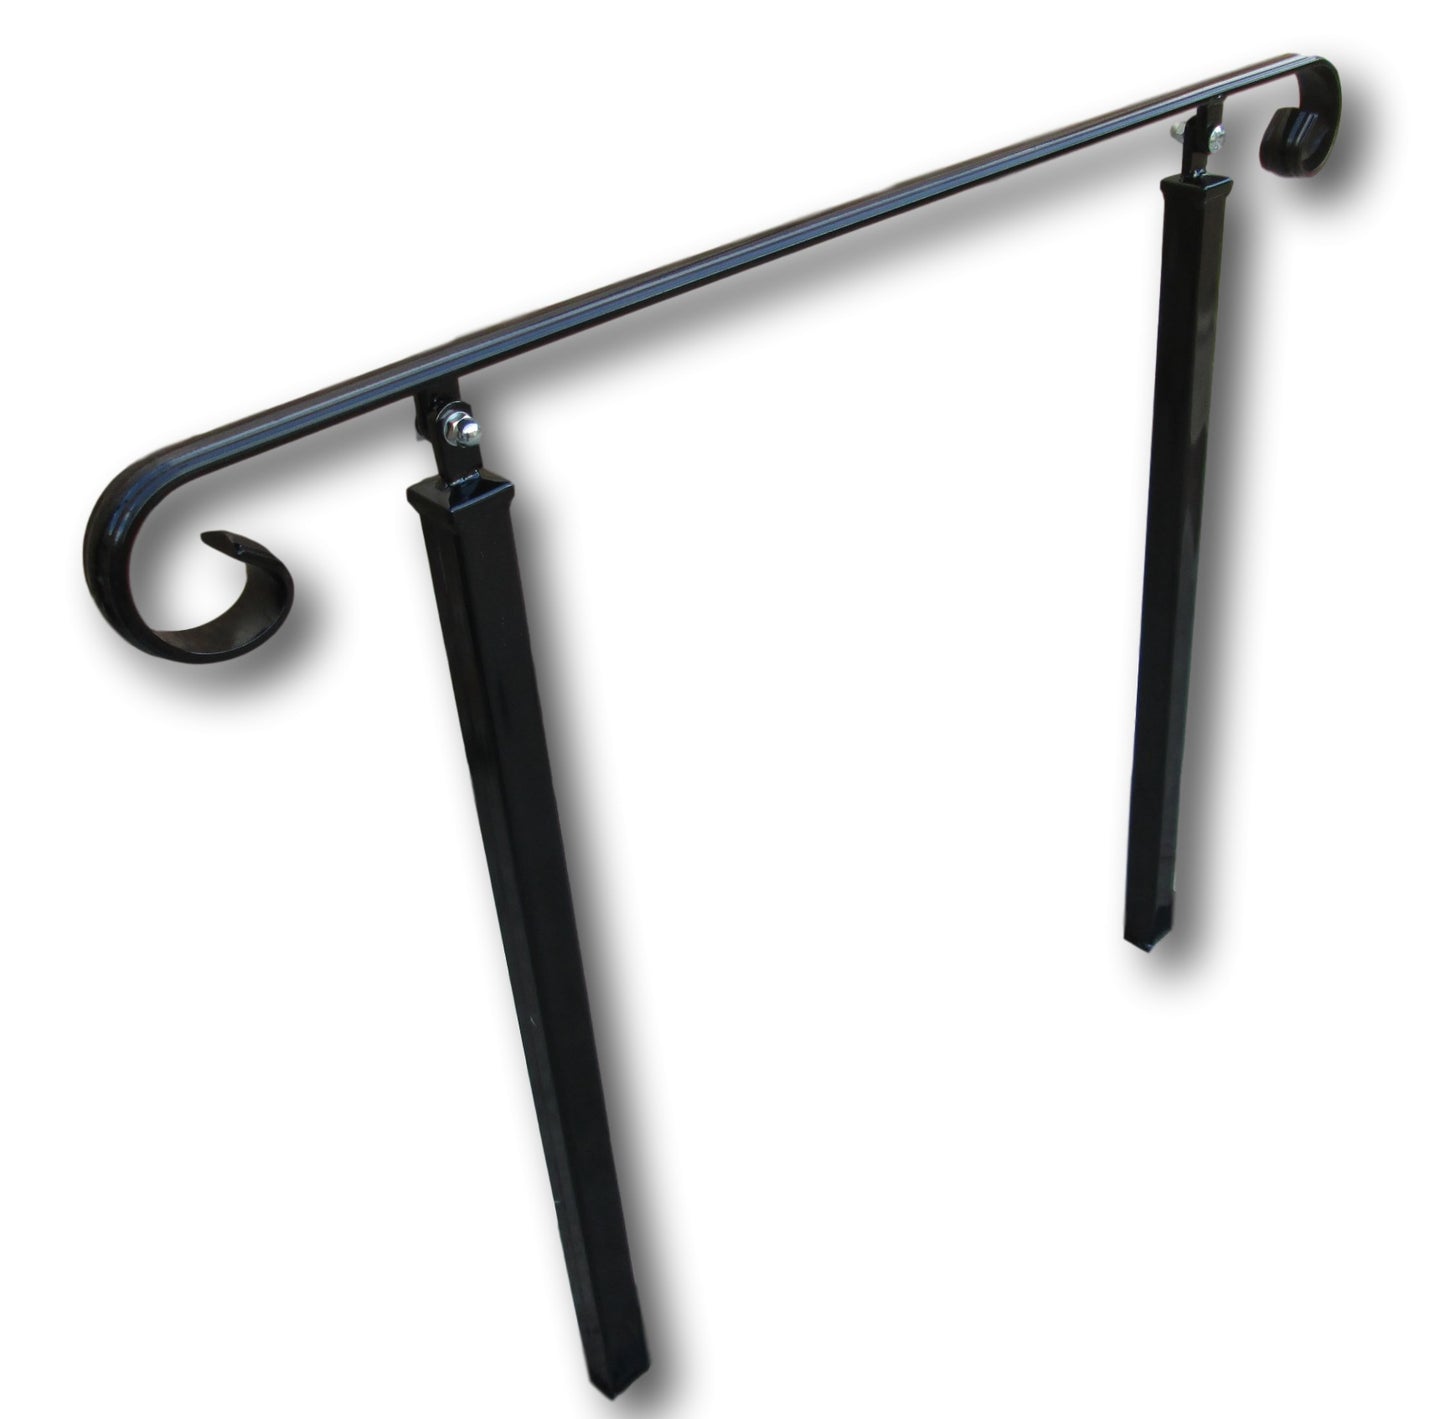 Wrought Iron Style Metal Handrail on Two Concrete in Posts - Amon - 1m-2.4m